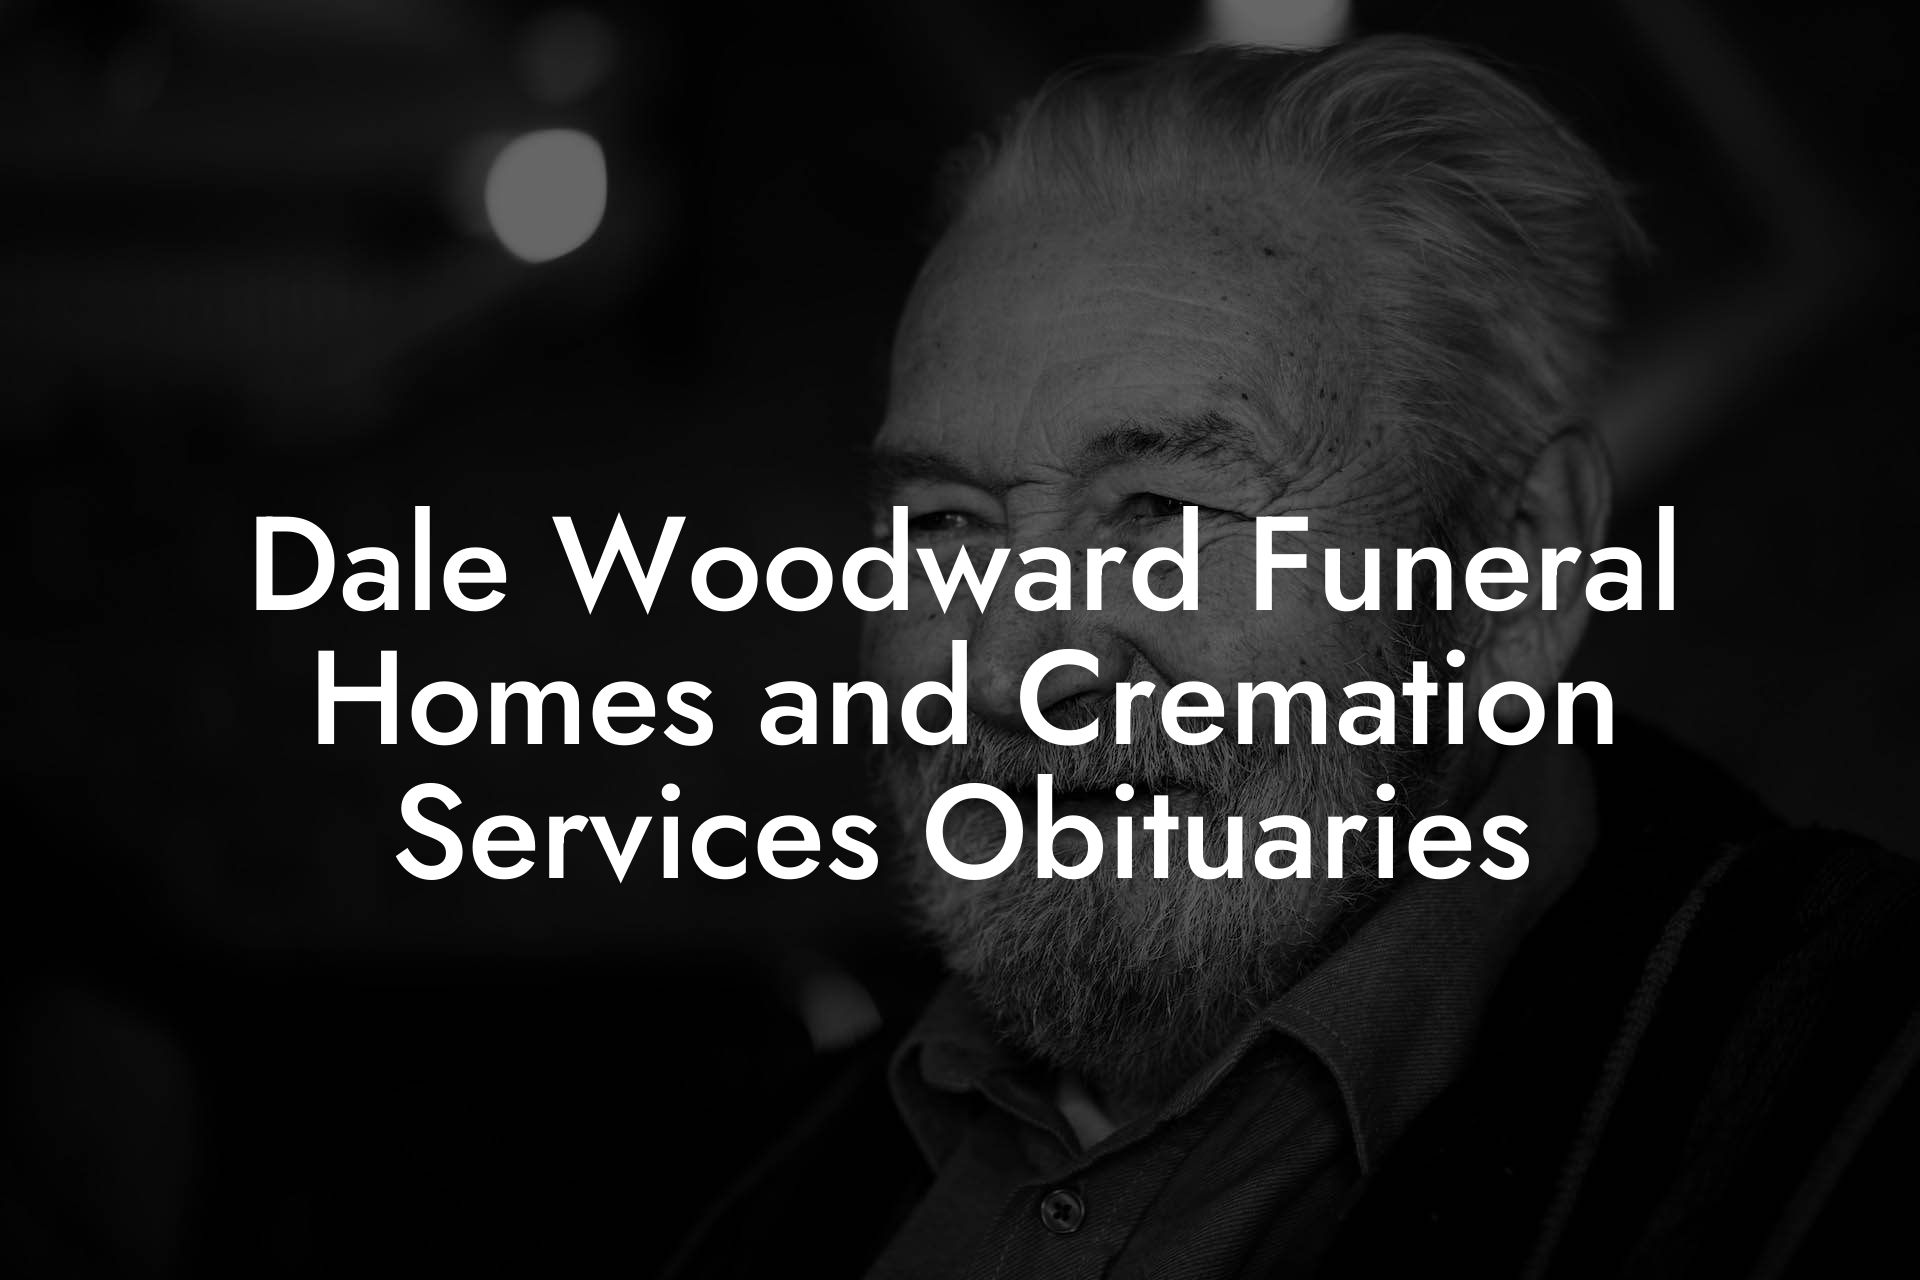 Dale Woodward Funeral Homes and Cremation Services Obituaries